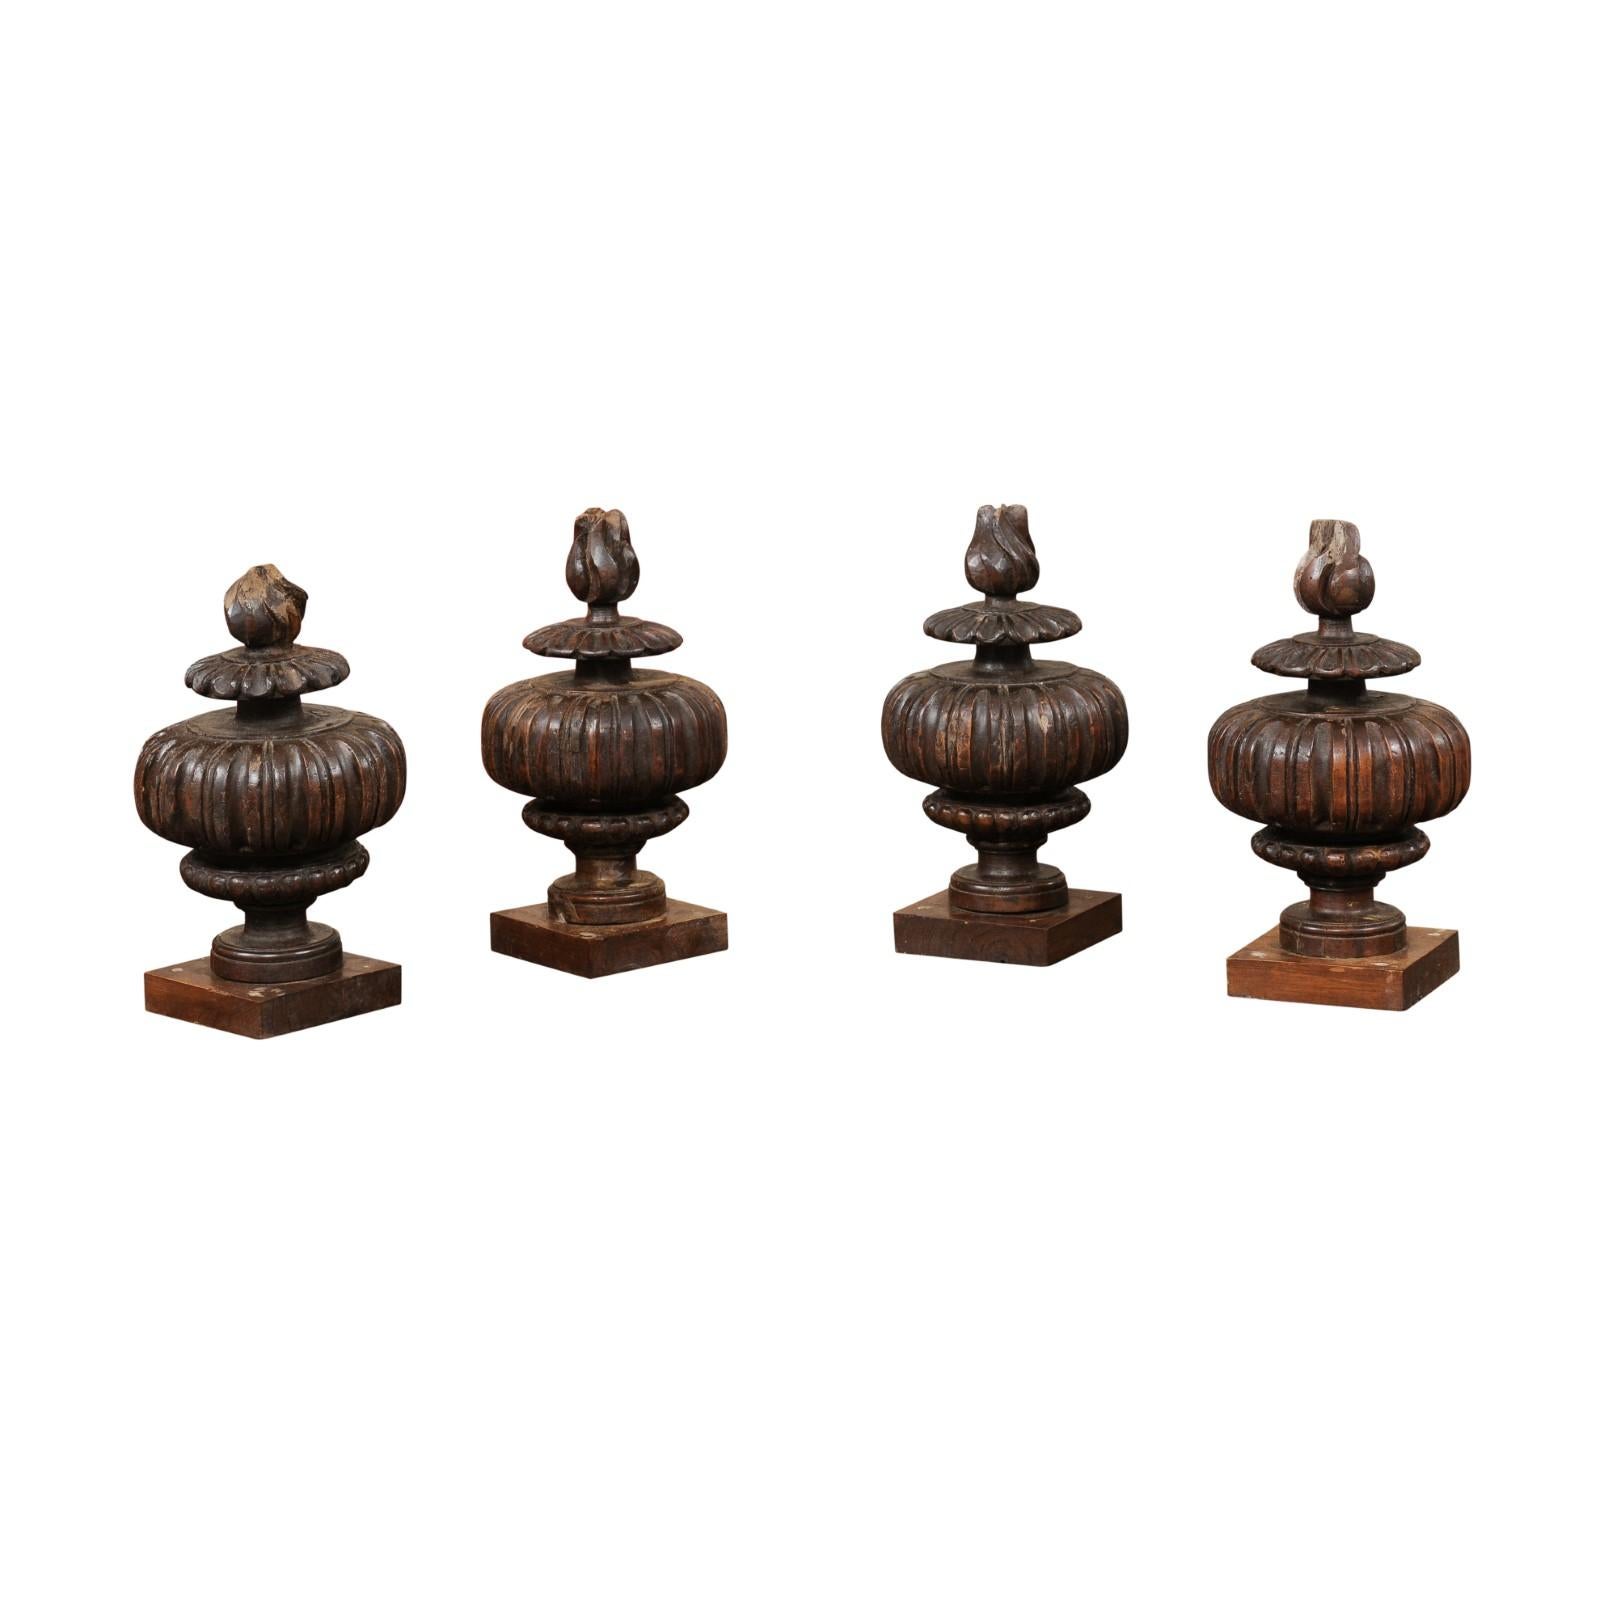 Set of 4 18th Century Italian Carved Wood Finials. SOLD IN PAIRS, PRICE PER PAIR